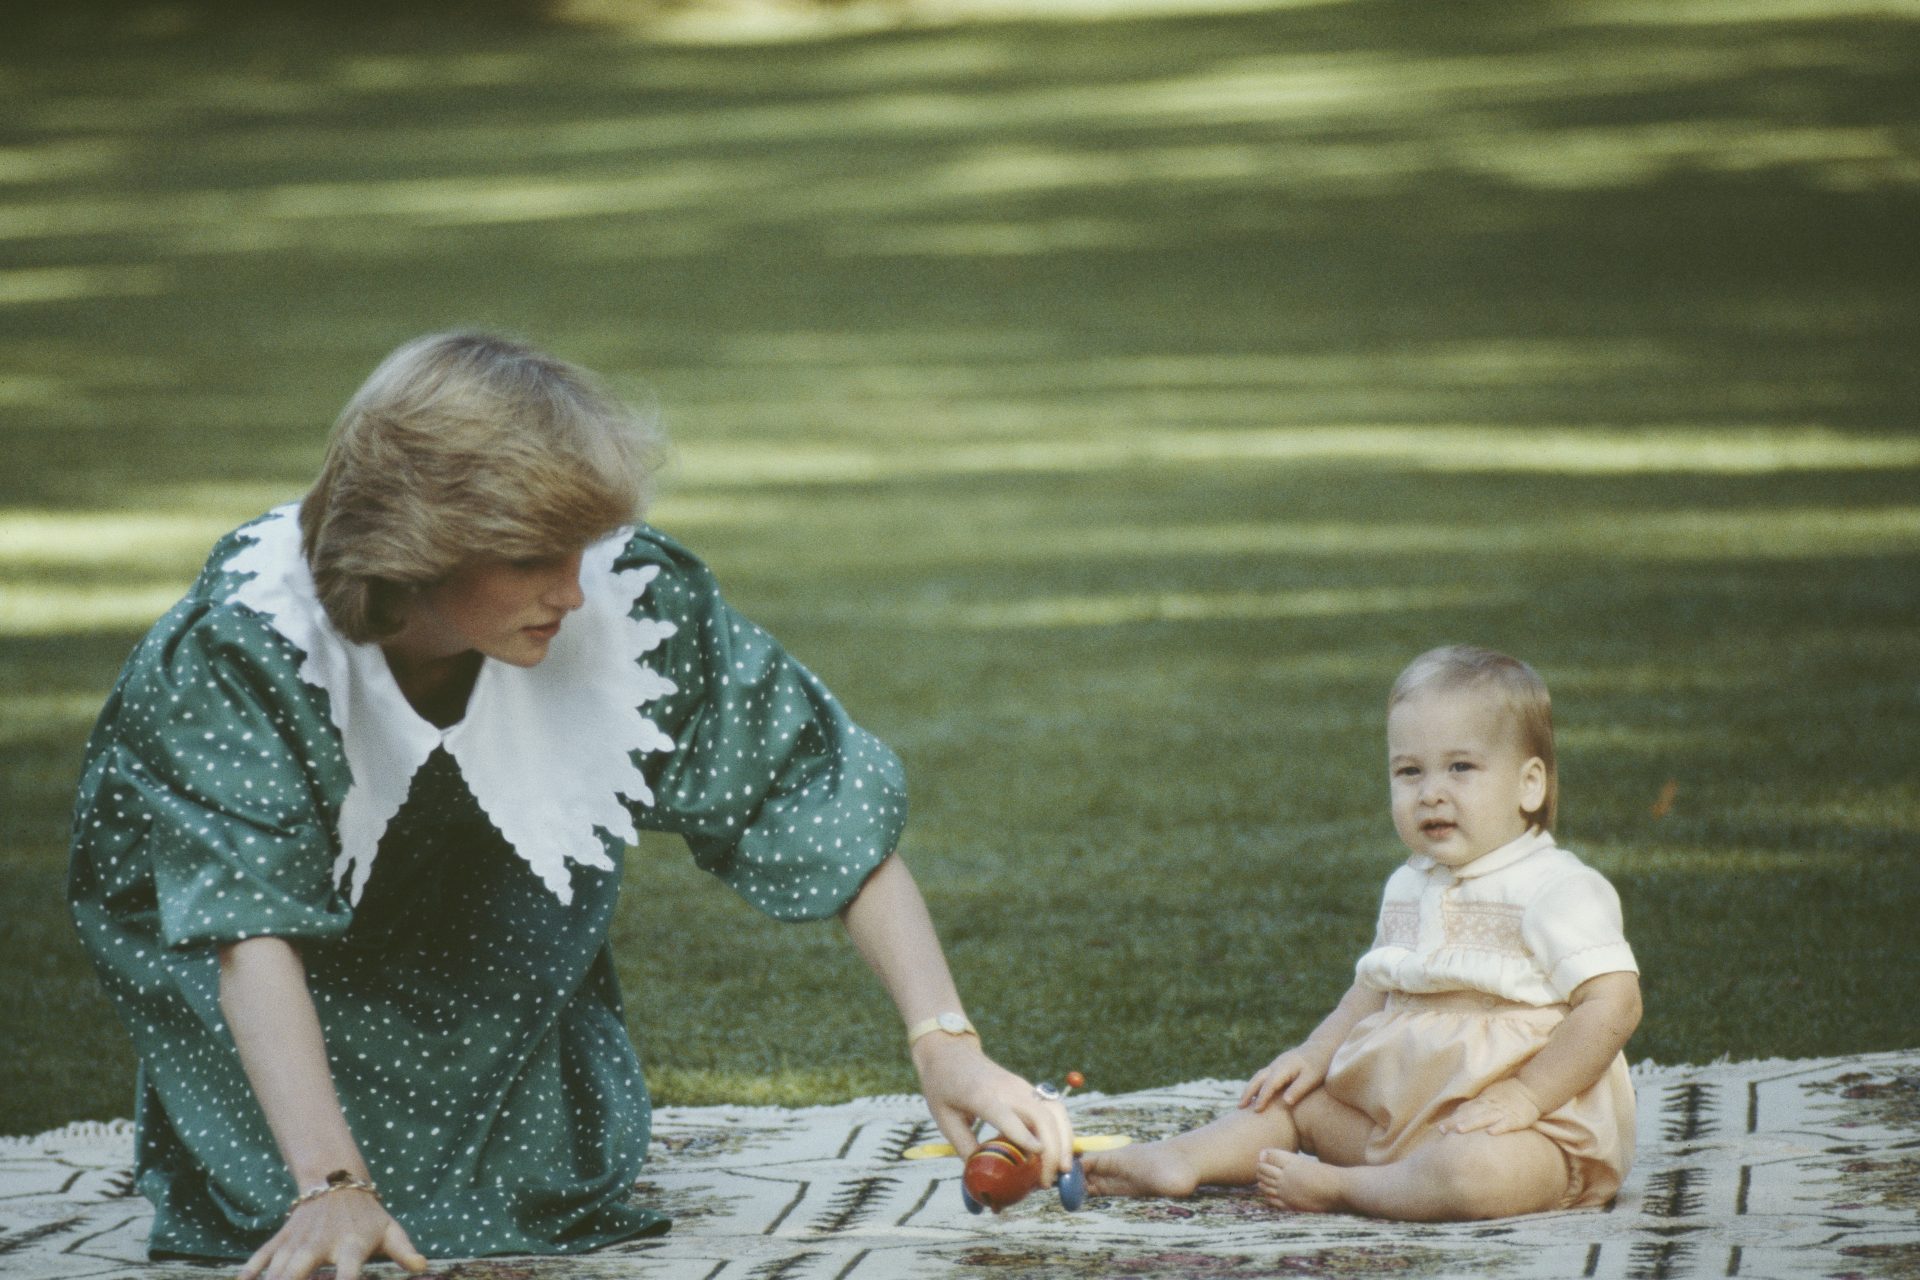 <p>Who remembers these delightful images of an earlier royal visit to New Zealand? It was 1983. Lady Diana and Charles played with their son William on the grounds of Auckland's Government House.</p>